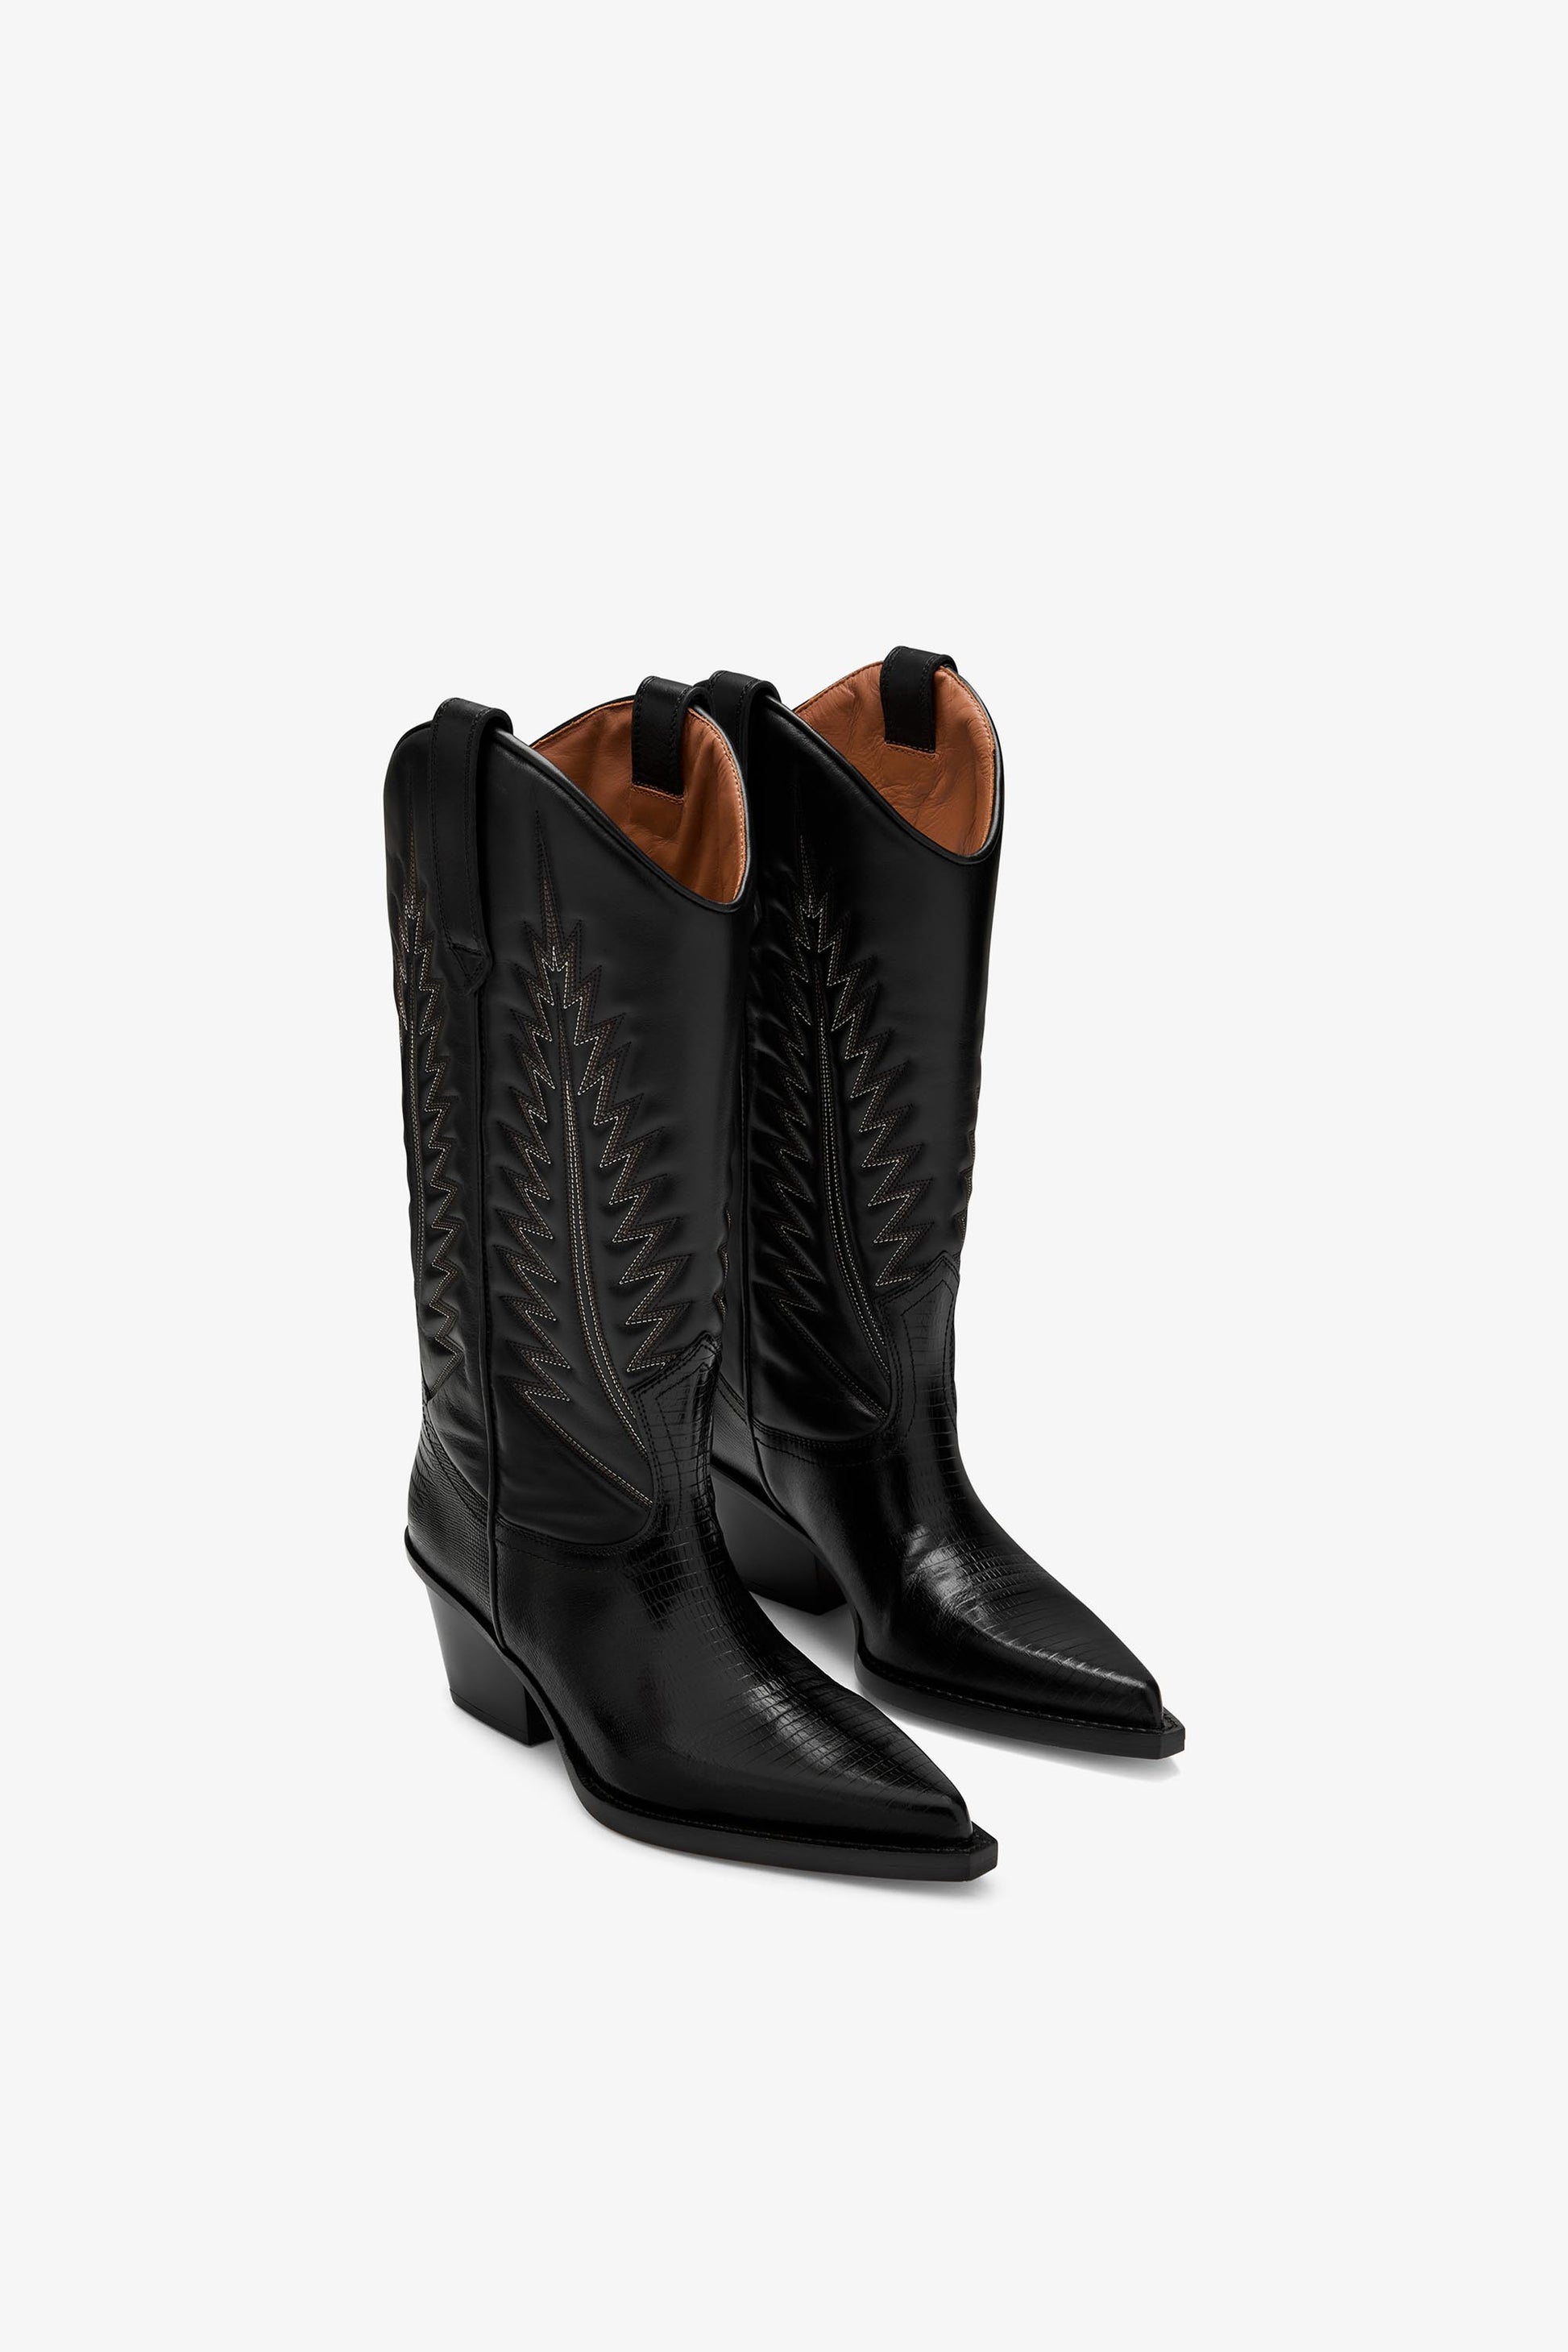 Black lizard-effect nappa leather boots